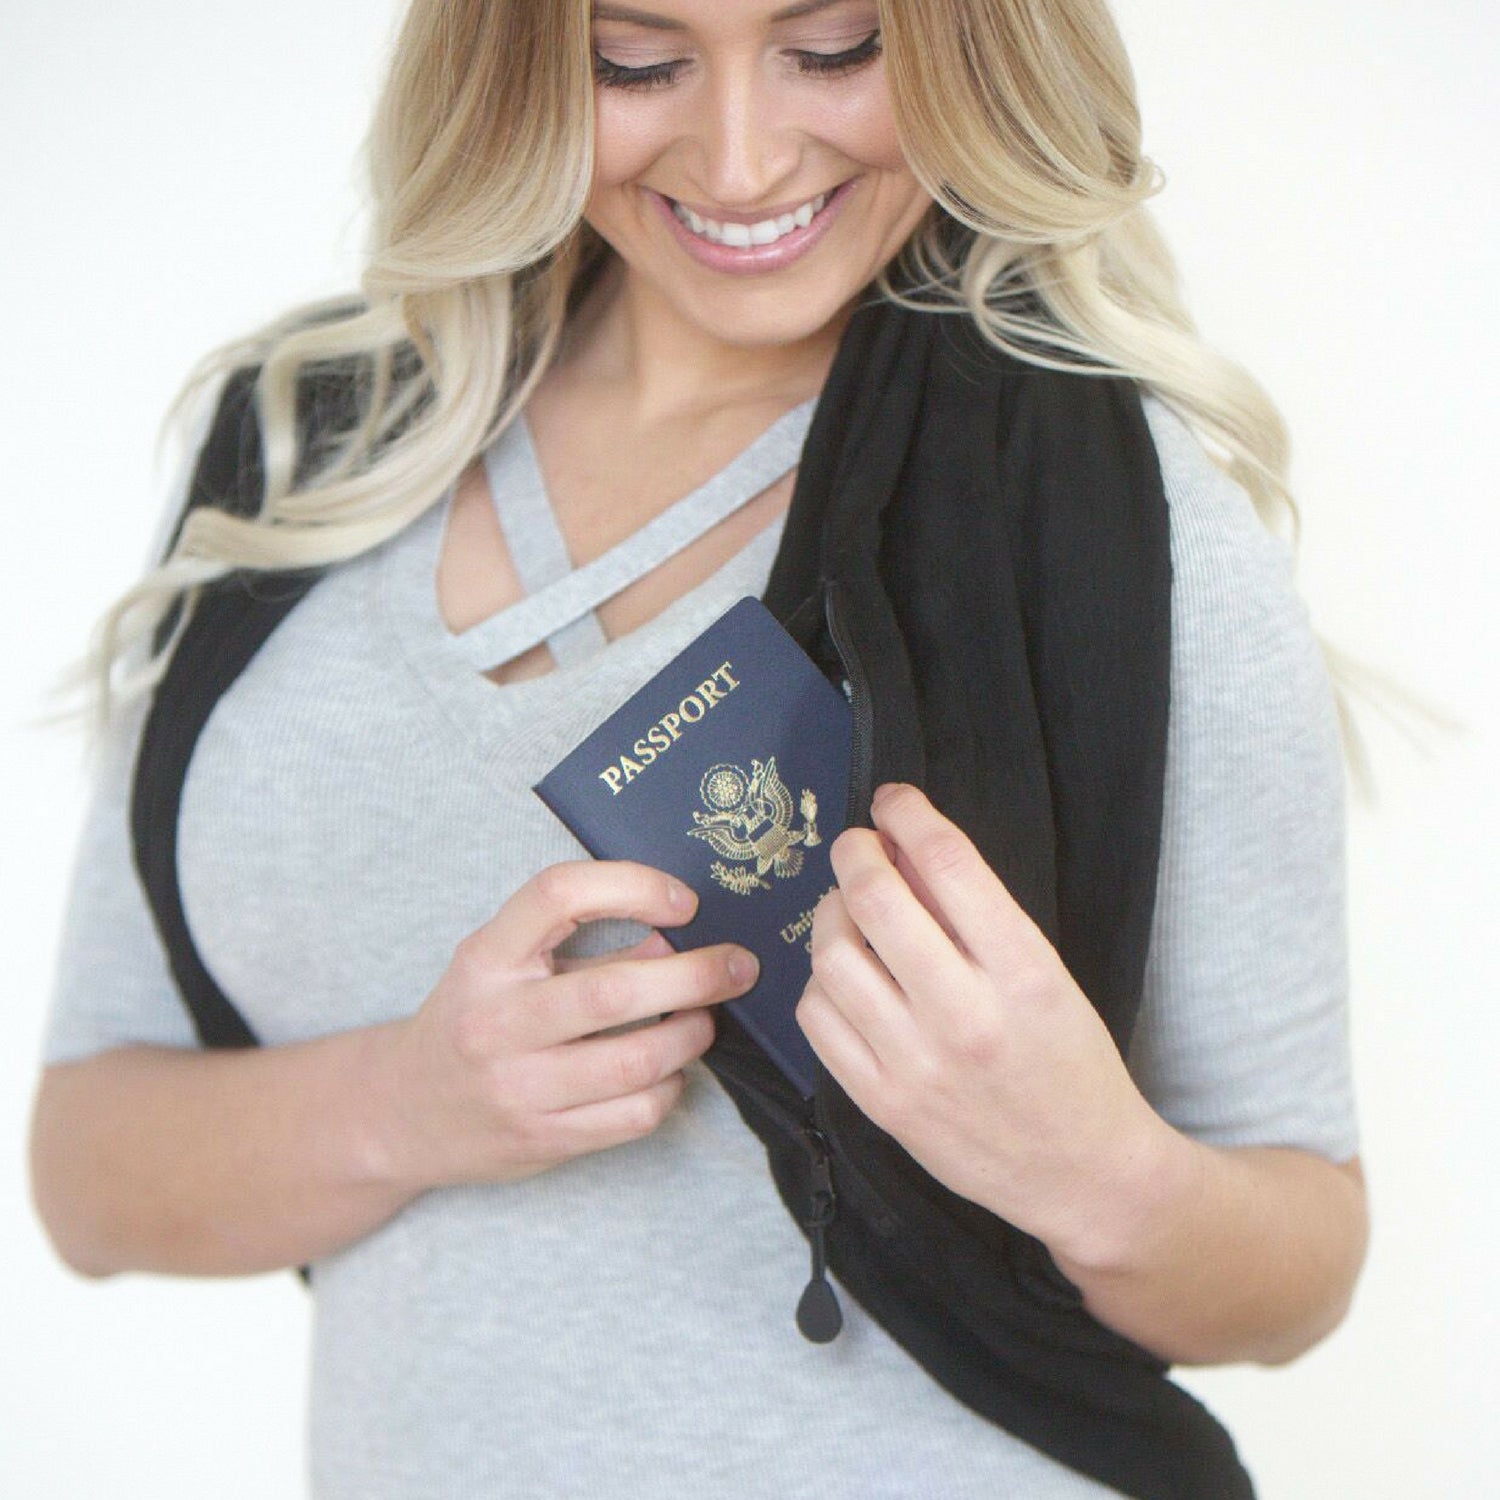  SHOLDIT Convertible Infinity Scarf with Pocket Mystic Black Shrug